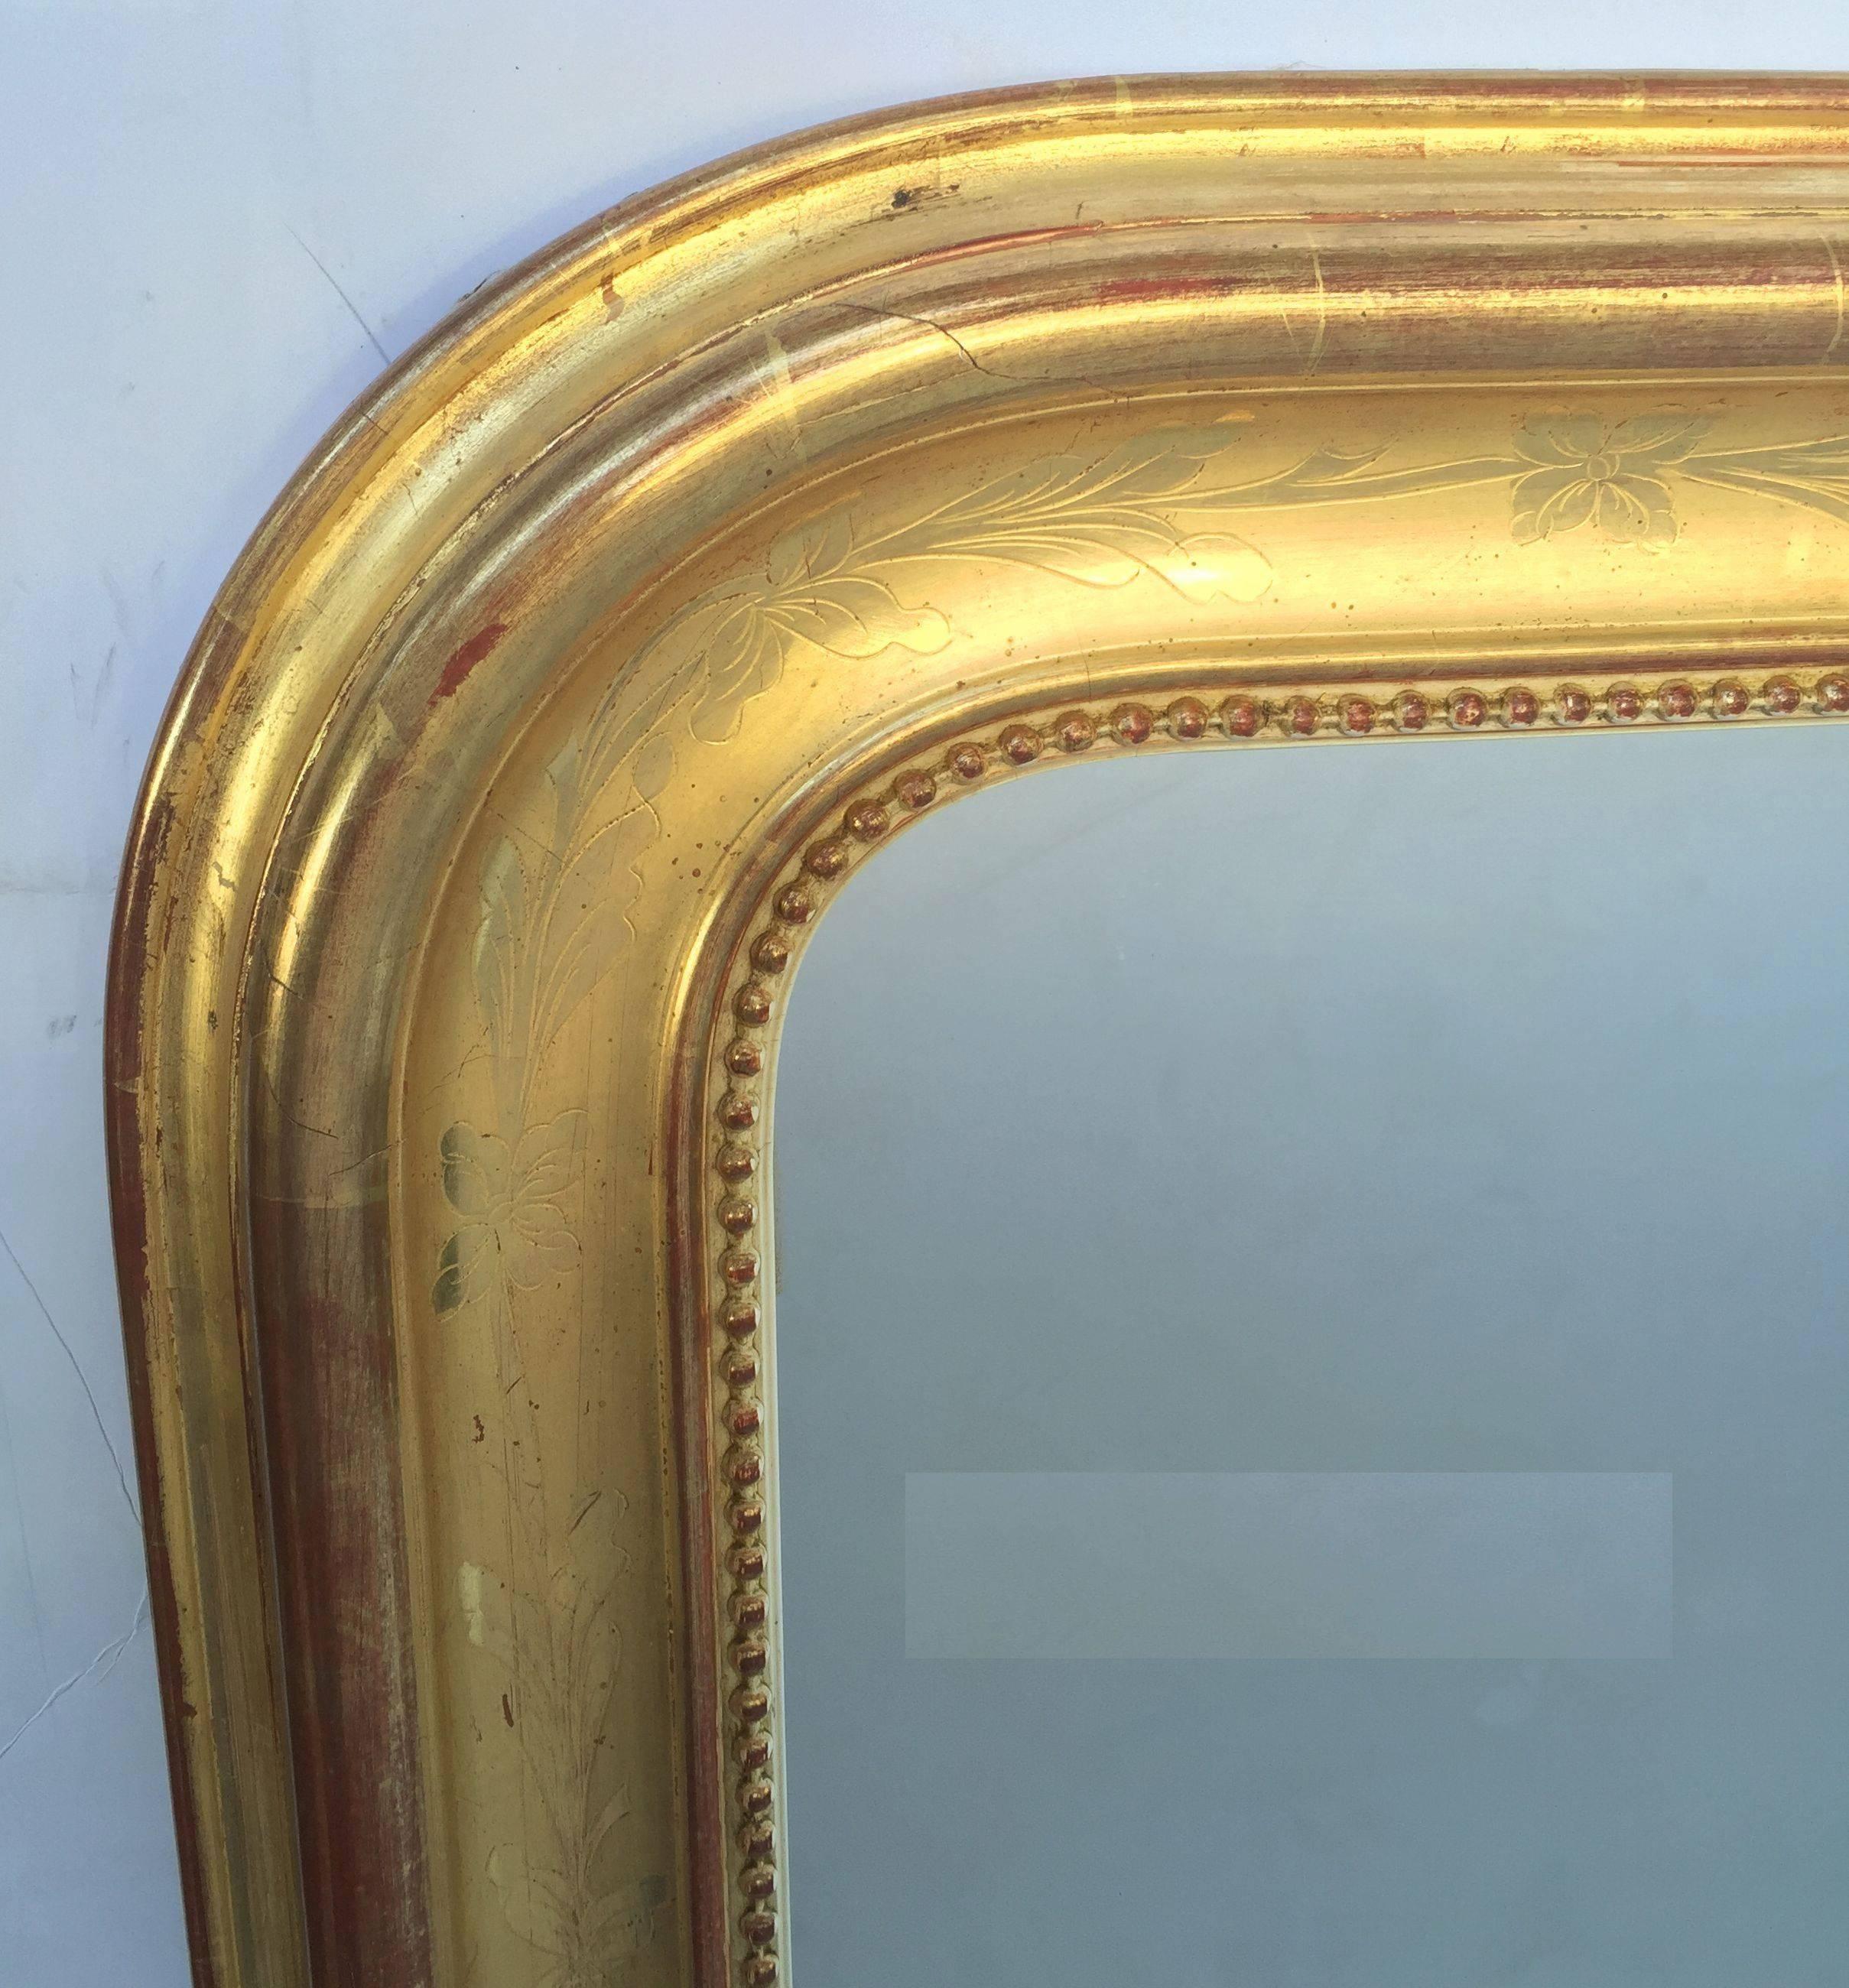 A handsome large Louis Philippe gilt wall mirror featuring a lovely moulded surround and an etched foliate design showing through gold-leaf.

Dimensions: H 51 3/4